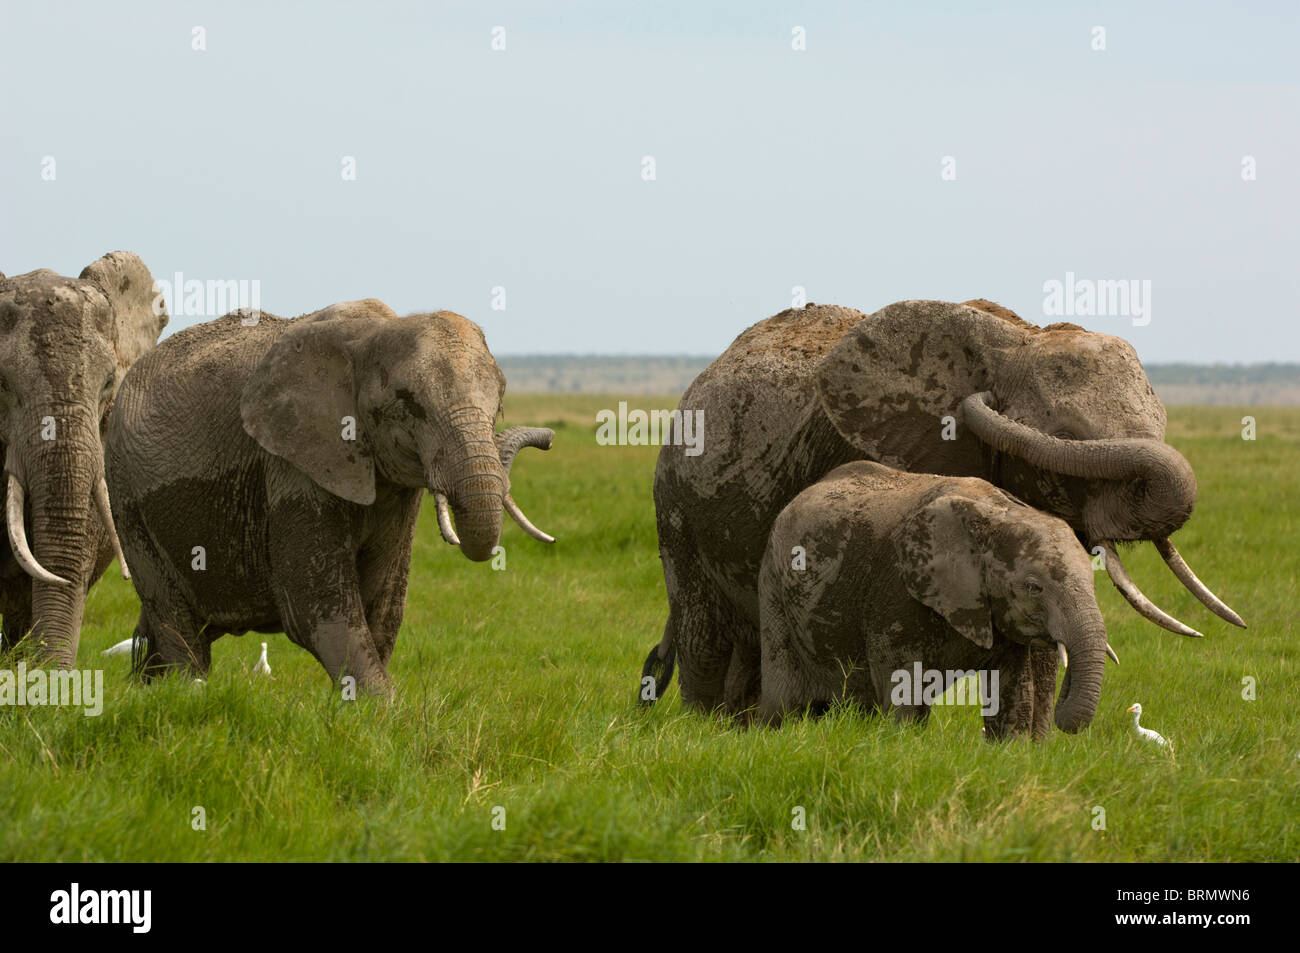 A herd of elephants (Loxodonta africana) walking across lush green grassland with the leader swinging its trunk across its face Stock Photo